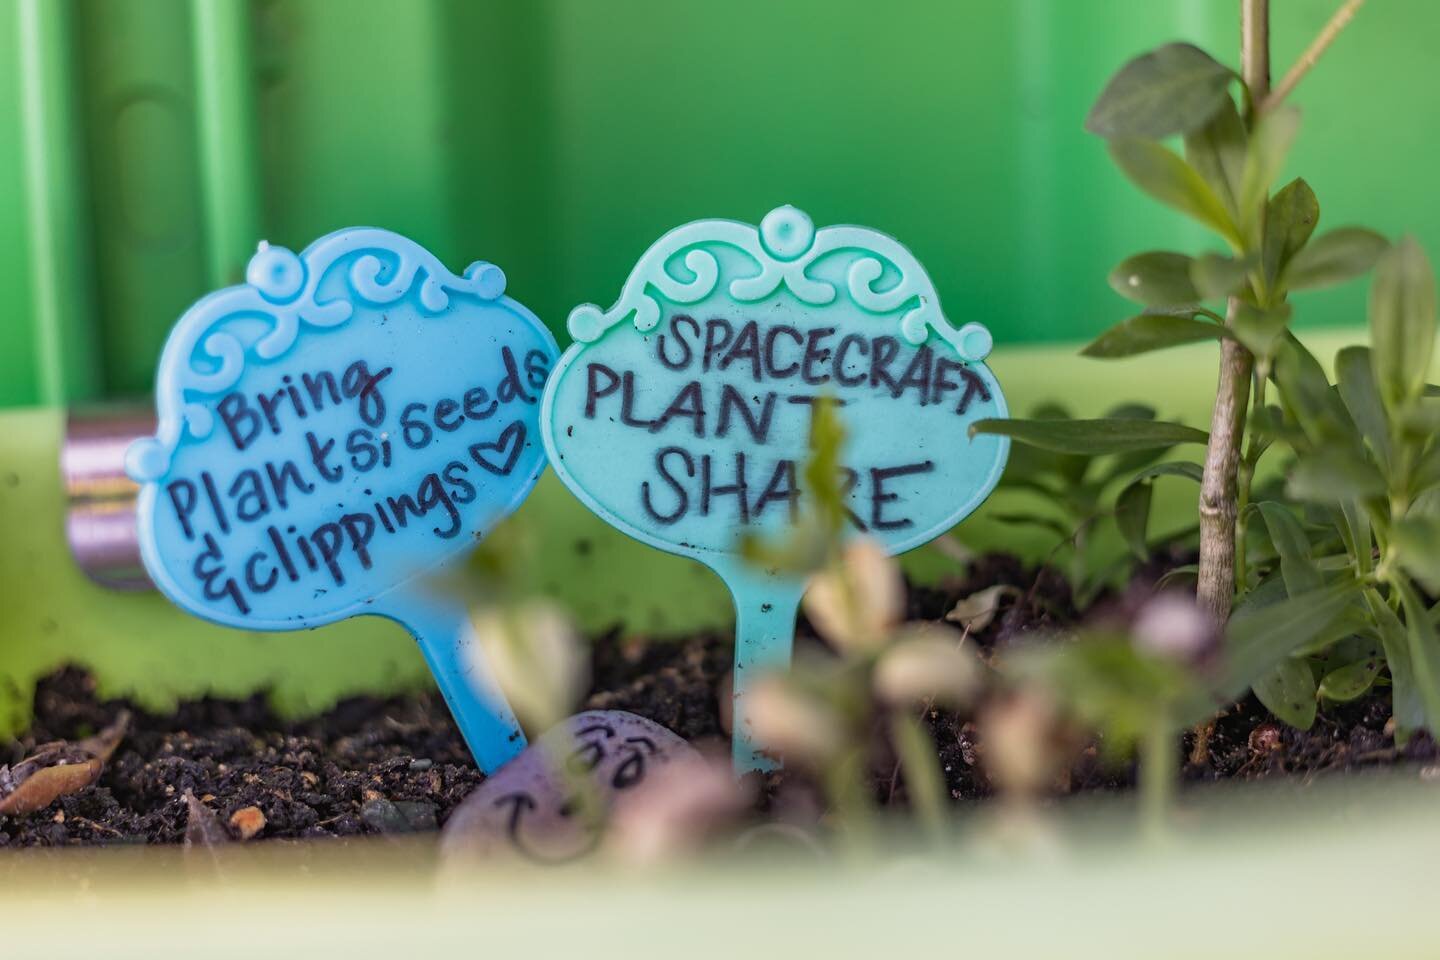 What do you nurture?🪴
______
Throughout our time traveling Pinellas County, we&rsquo;ve felt that the SPACEcraft containers, especially the GROW container, curated an environment for nurturing. A space to connect with nature, while connecting with y